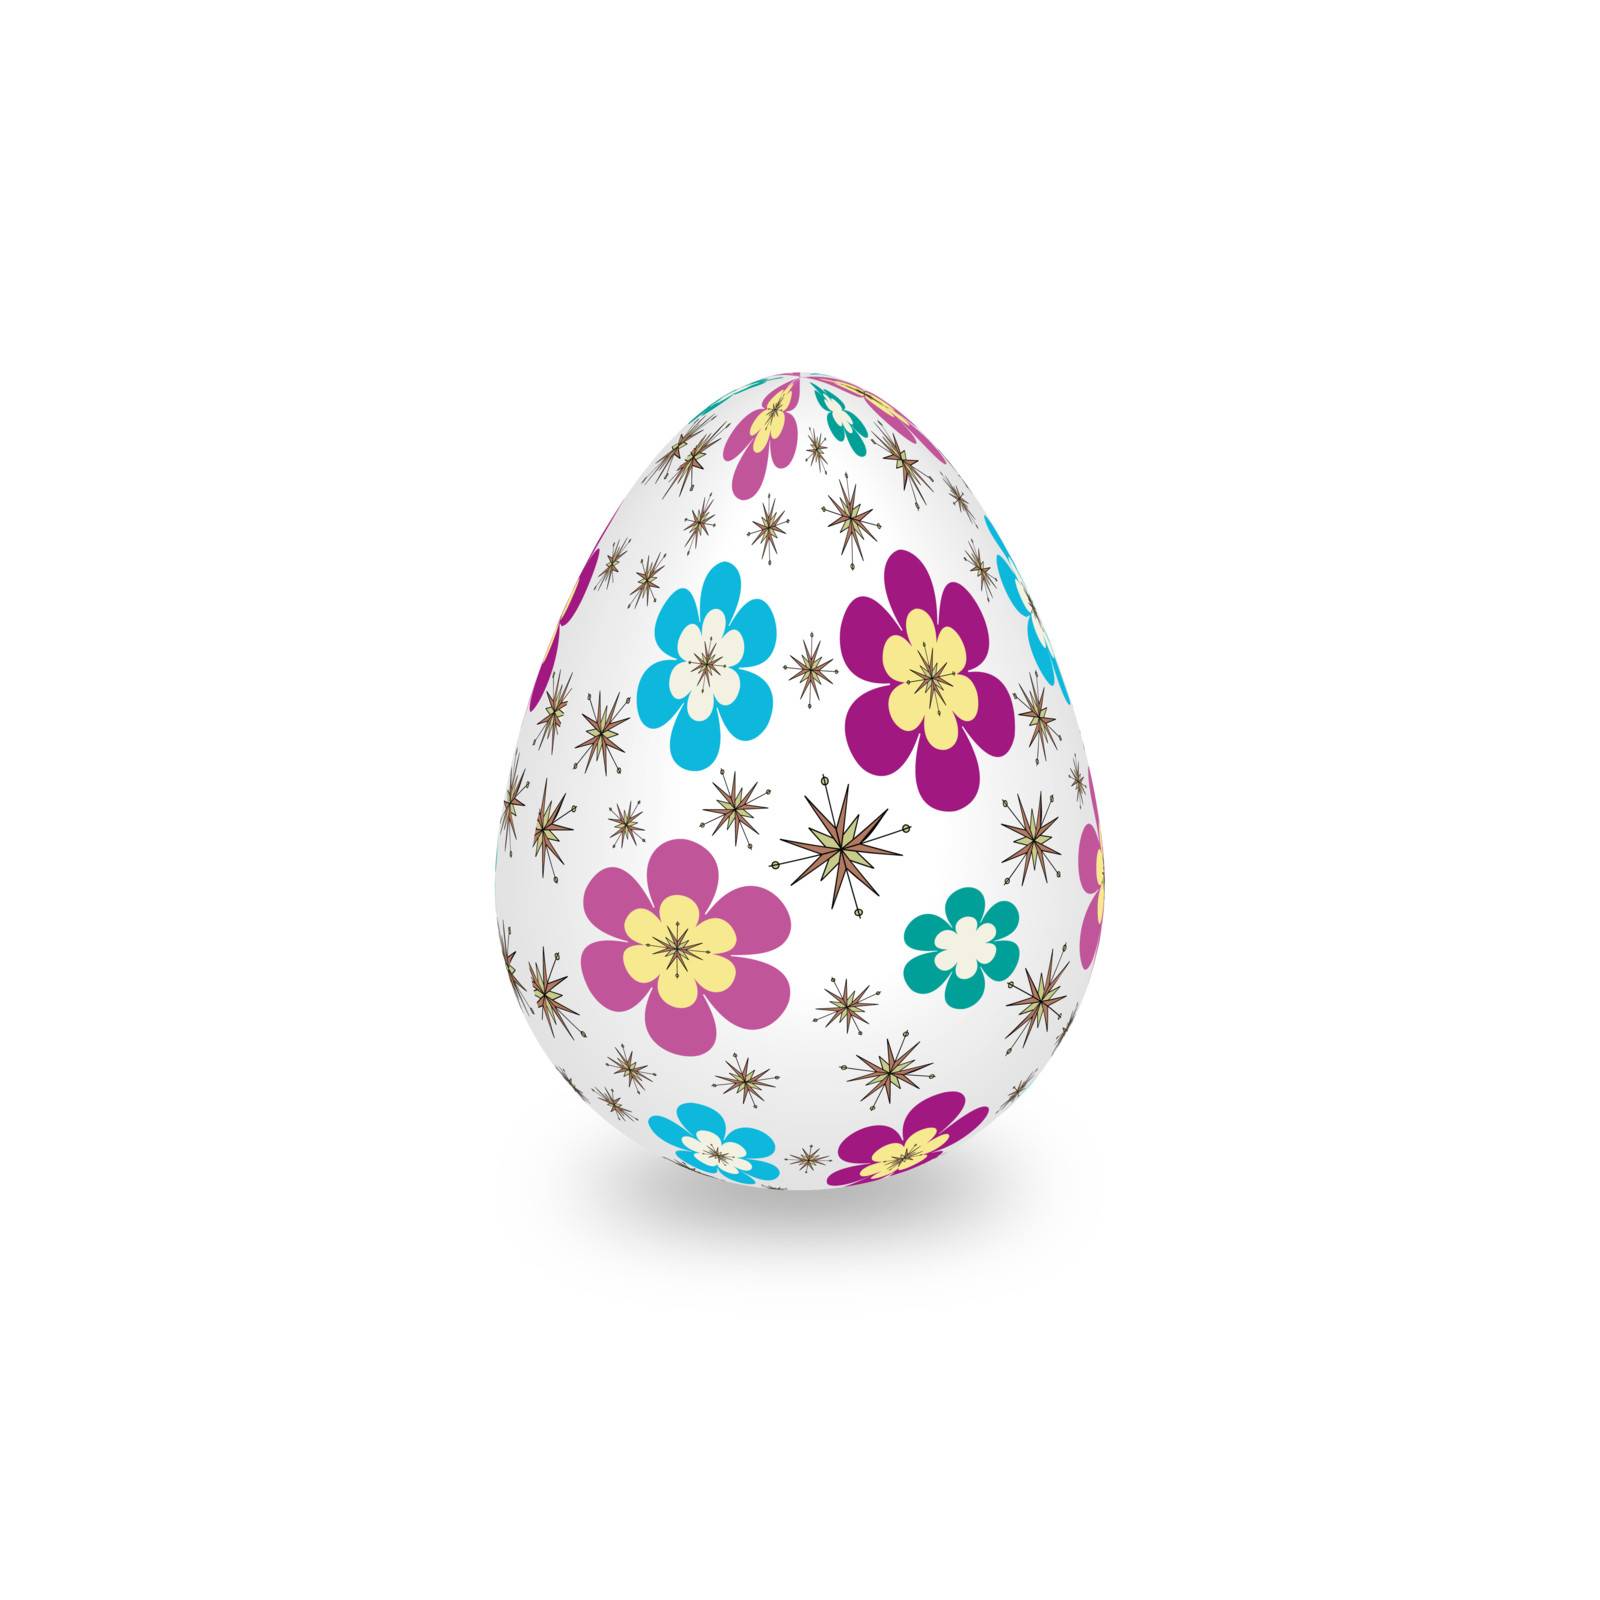 It's revival in the world symbolizing the ornate easter eggs